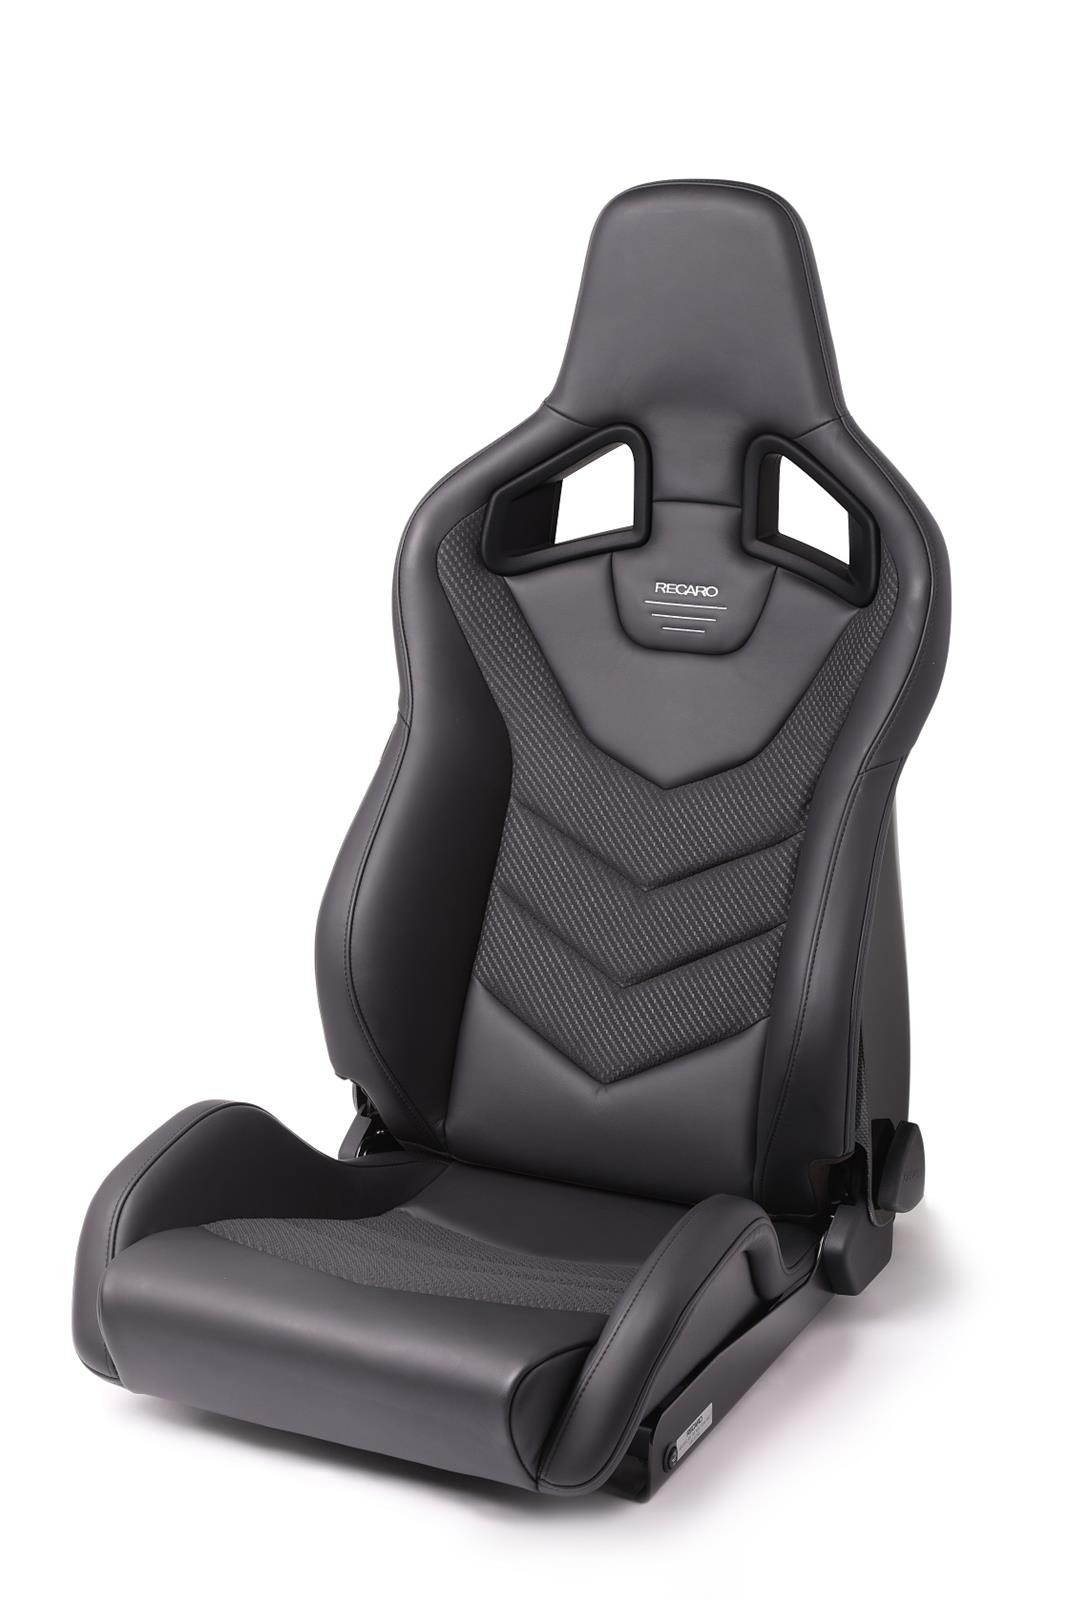 Recaro Sportster GT w/Sub-Hole Driver Seat - Black Leather/Carbon Weave - 410.1SH.3167